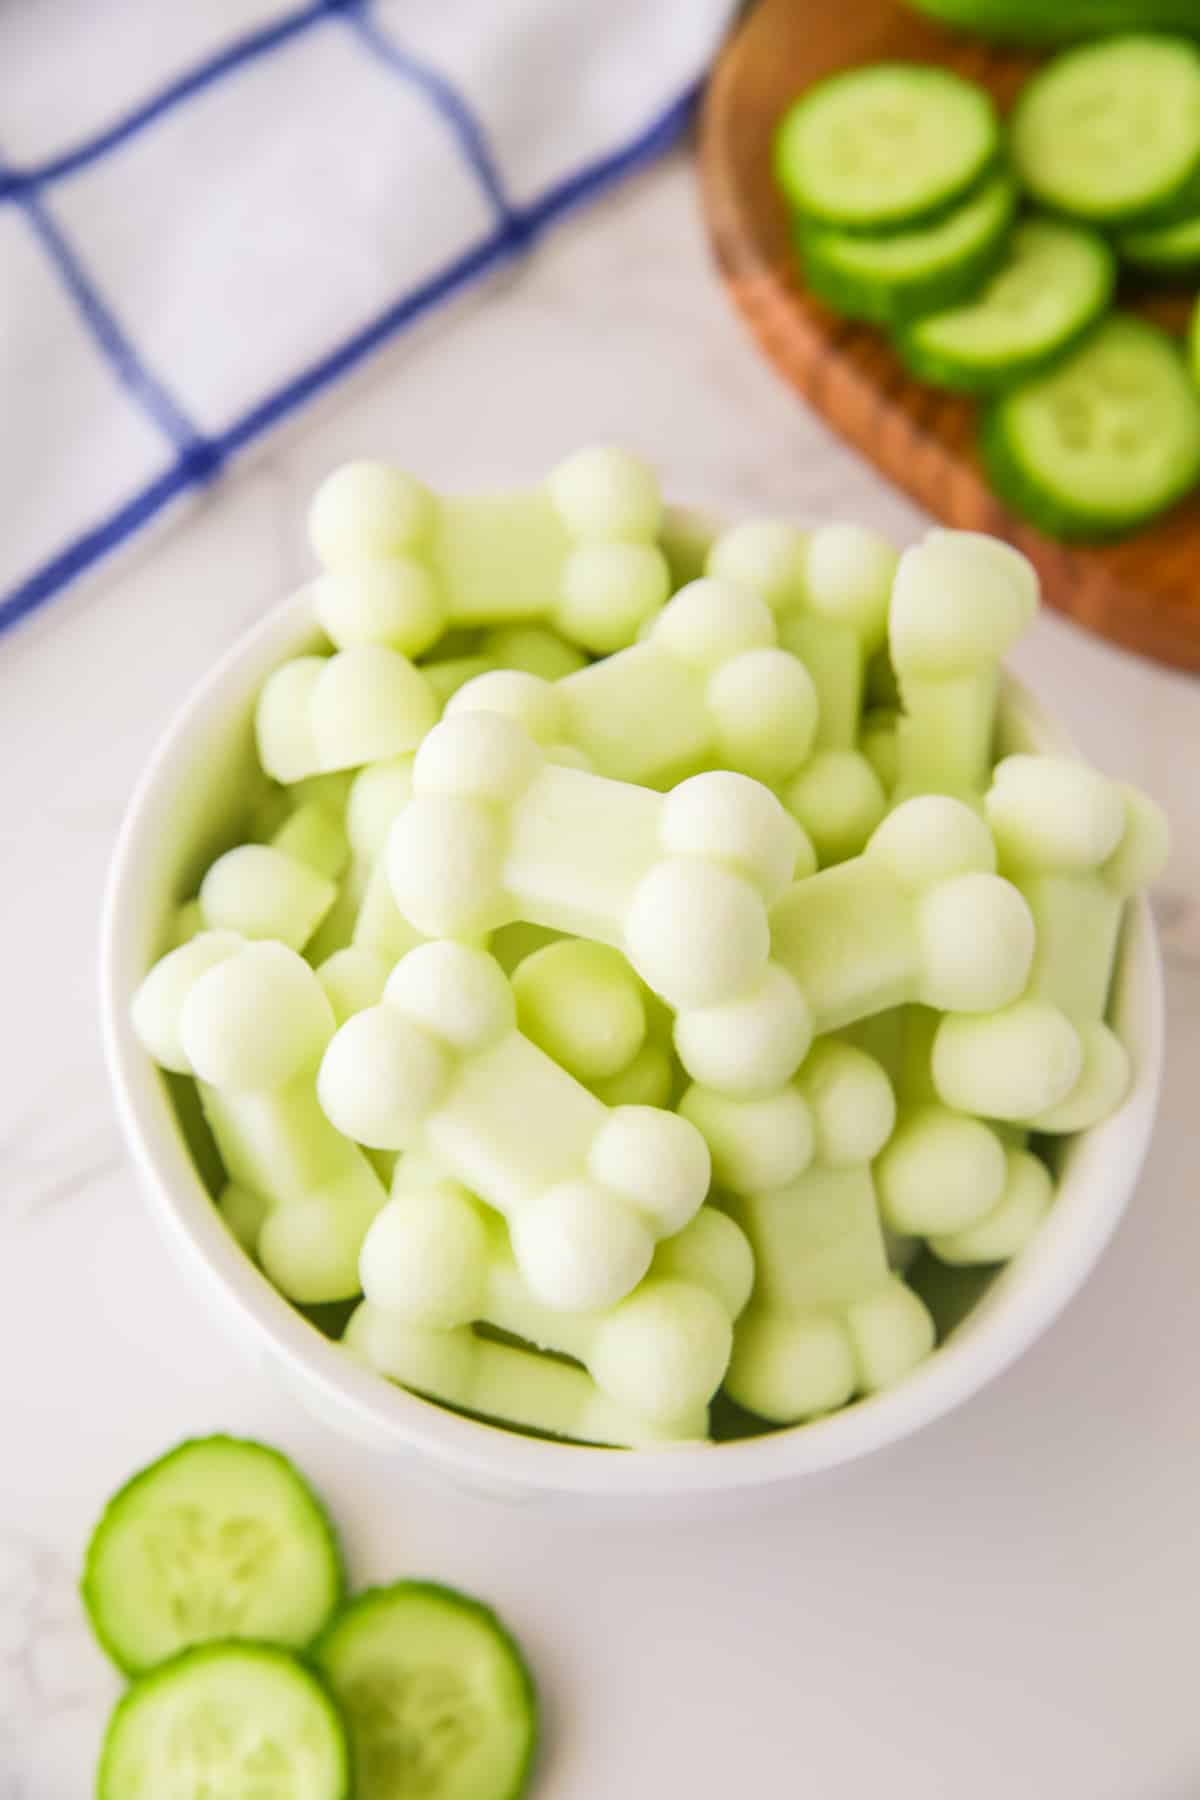 A bowl of bone-shaped yogurt cucumber treats on a white surface, with more cucumber slices and a blue-striped towel in the background.